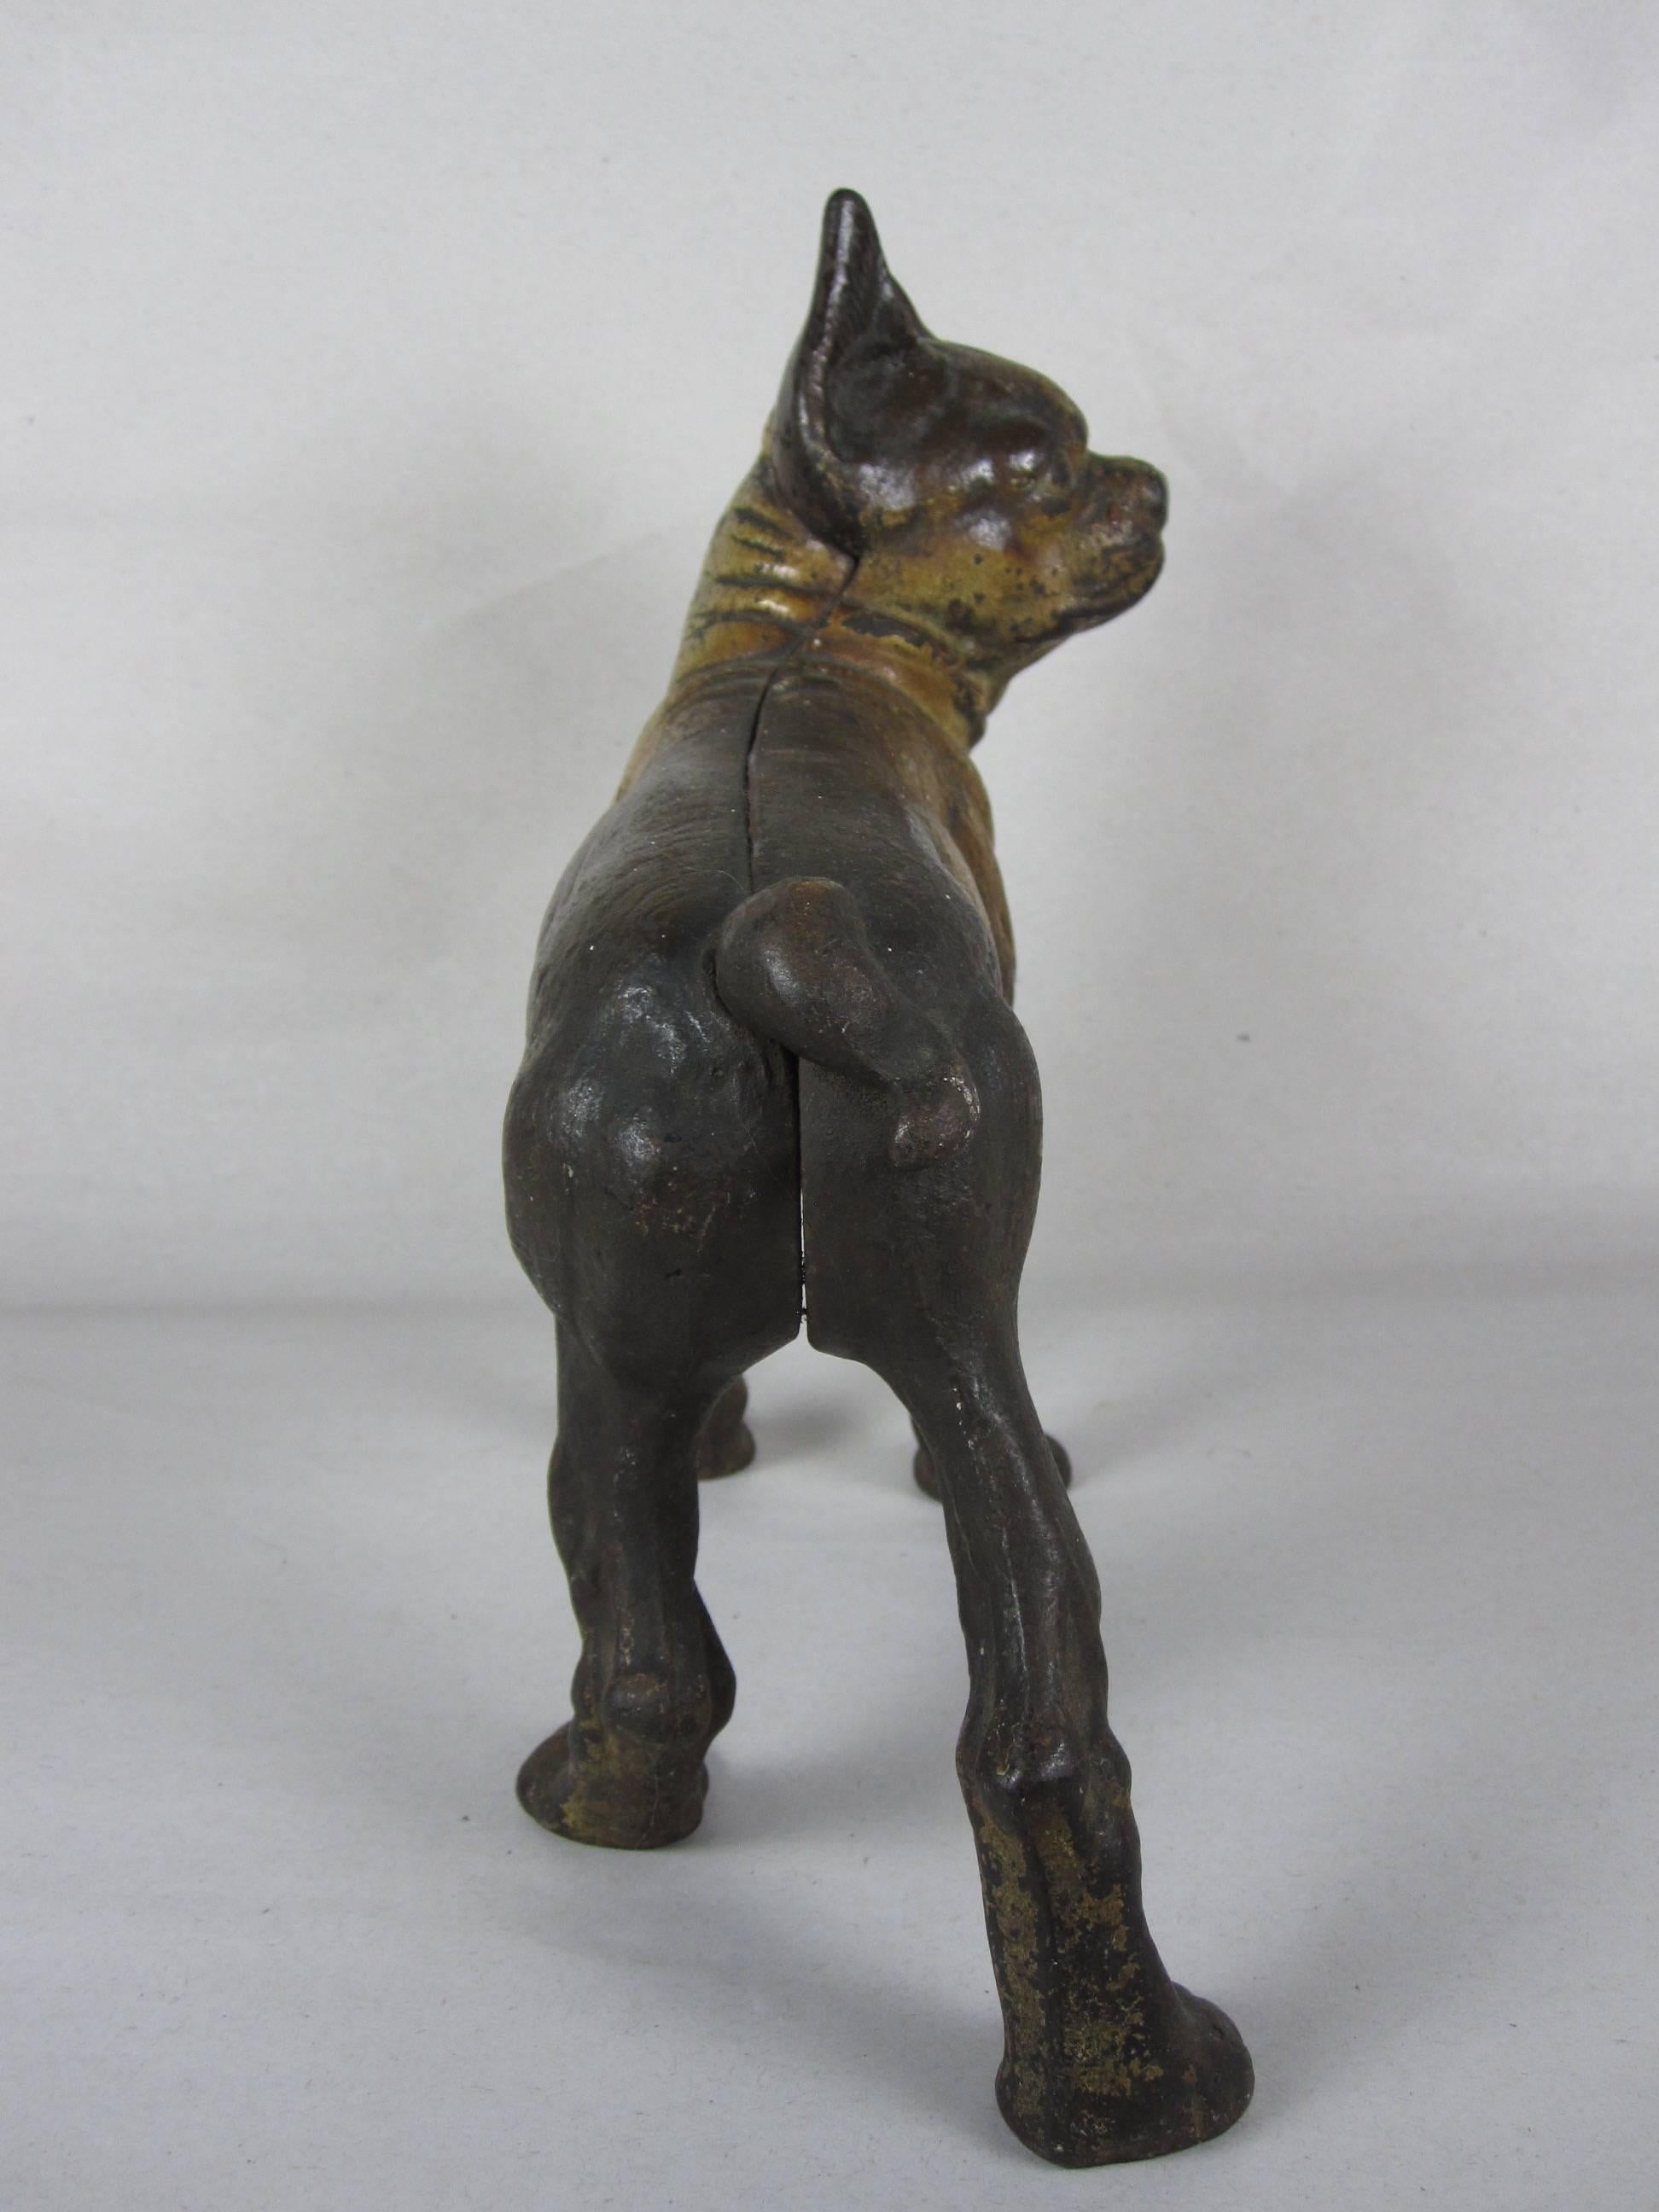 American Antique Hubley Cast Iron French Bulldog Doorstop with Original Painted Finish